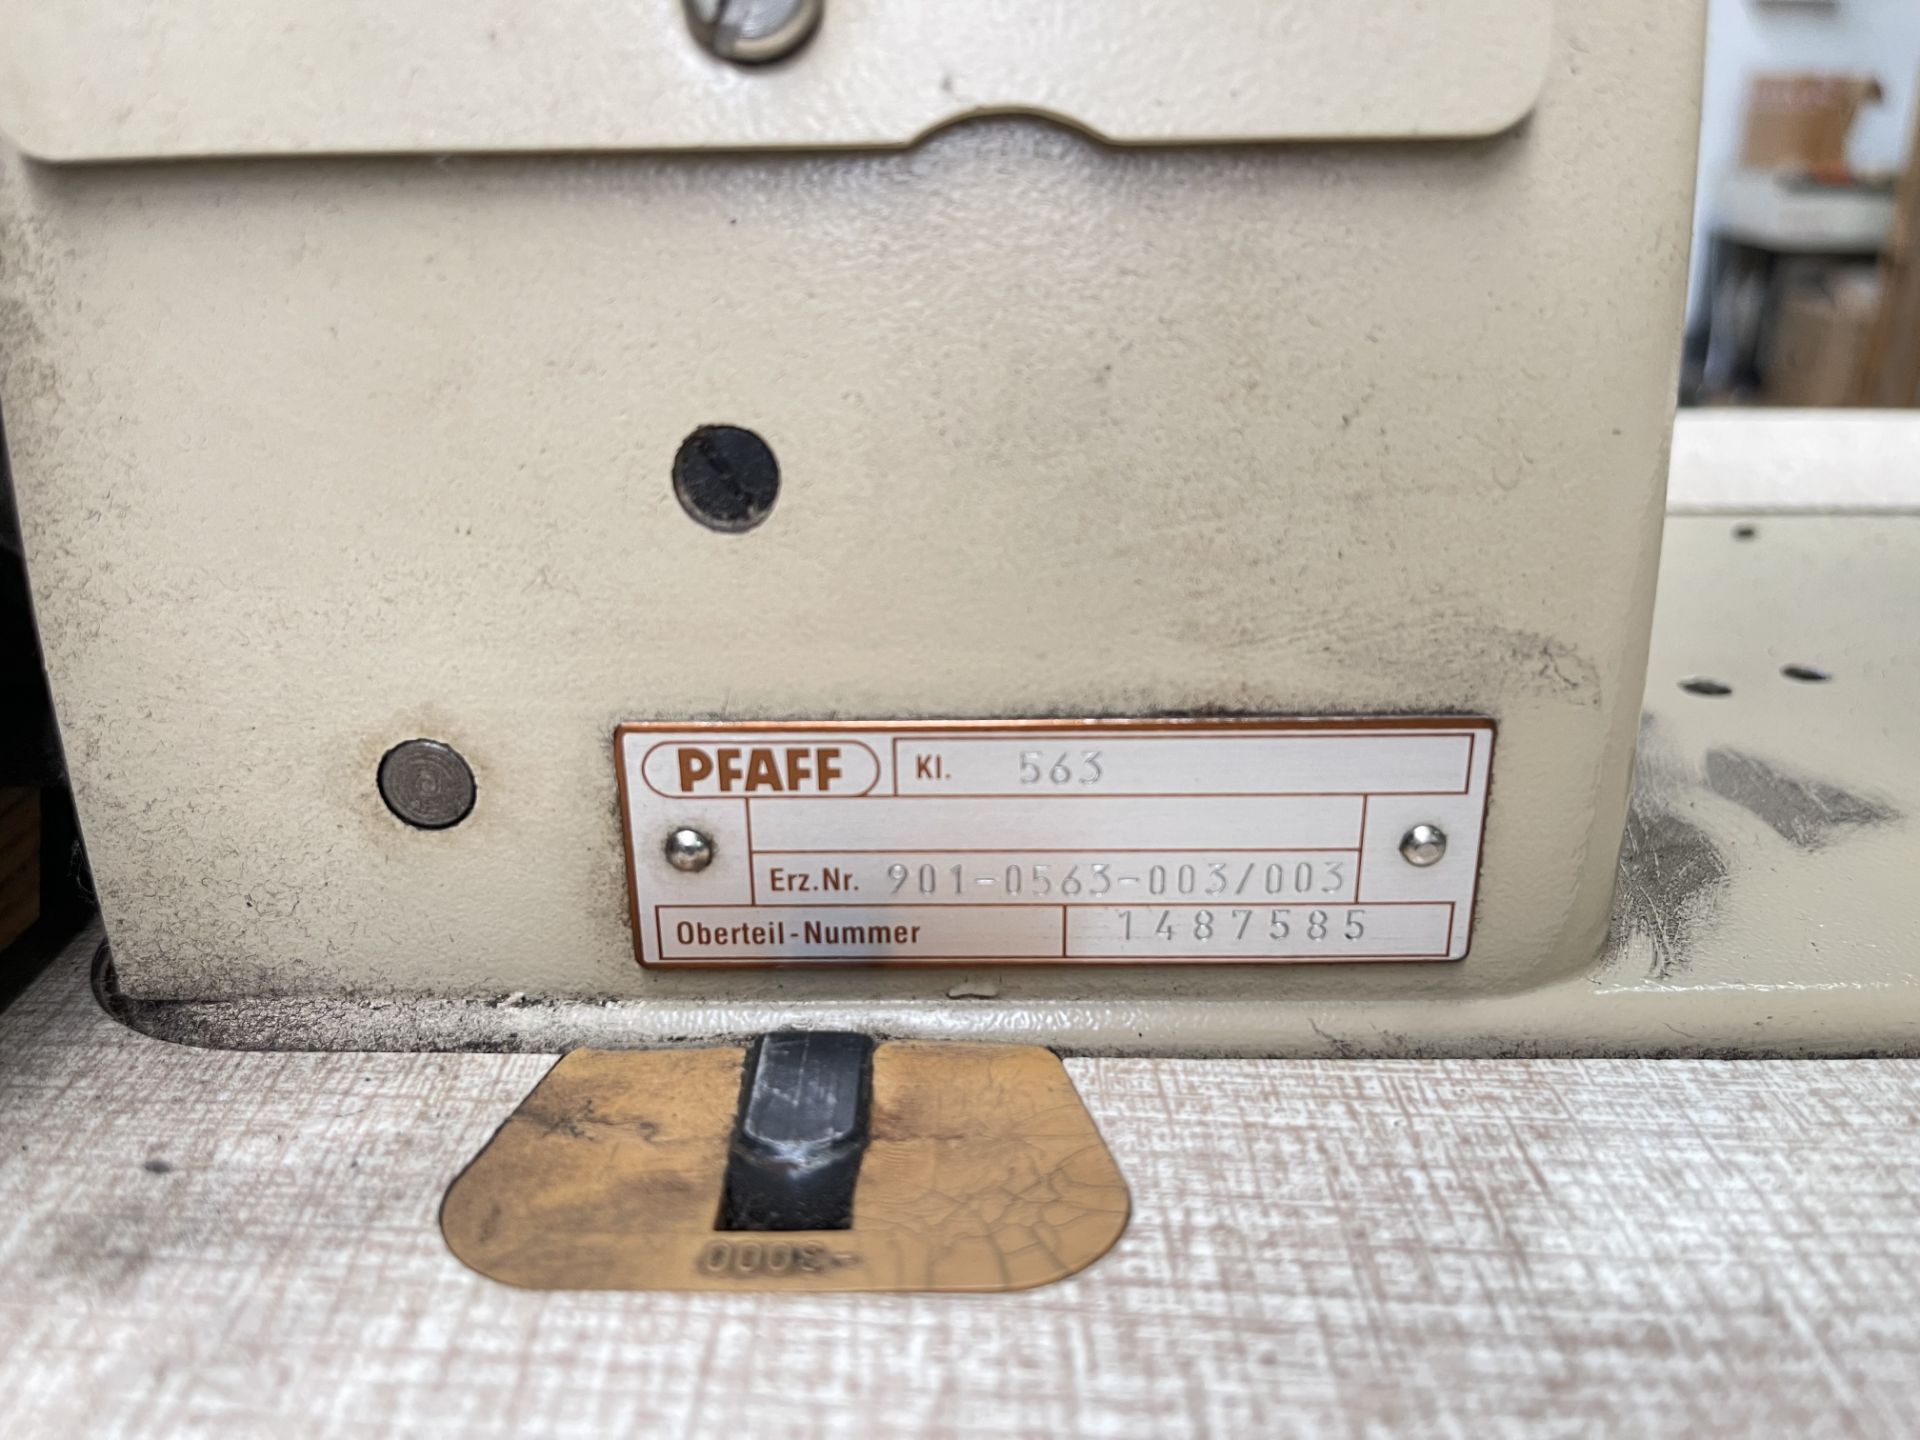 Pfaff 563 Industrial Sewing machine. S/No 1487585 - Image 8 of 8